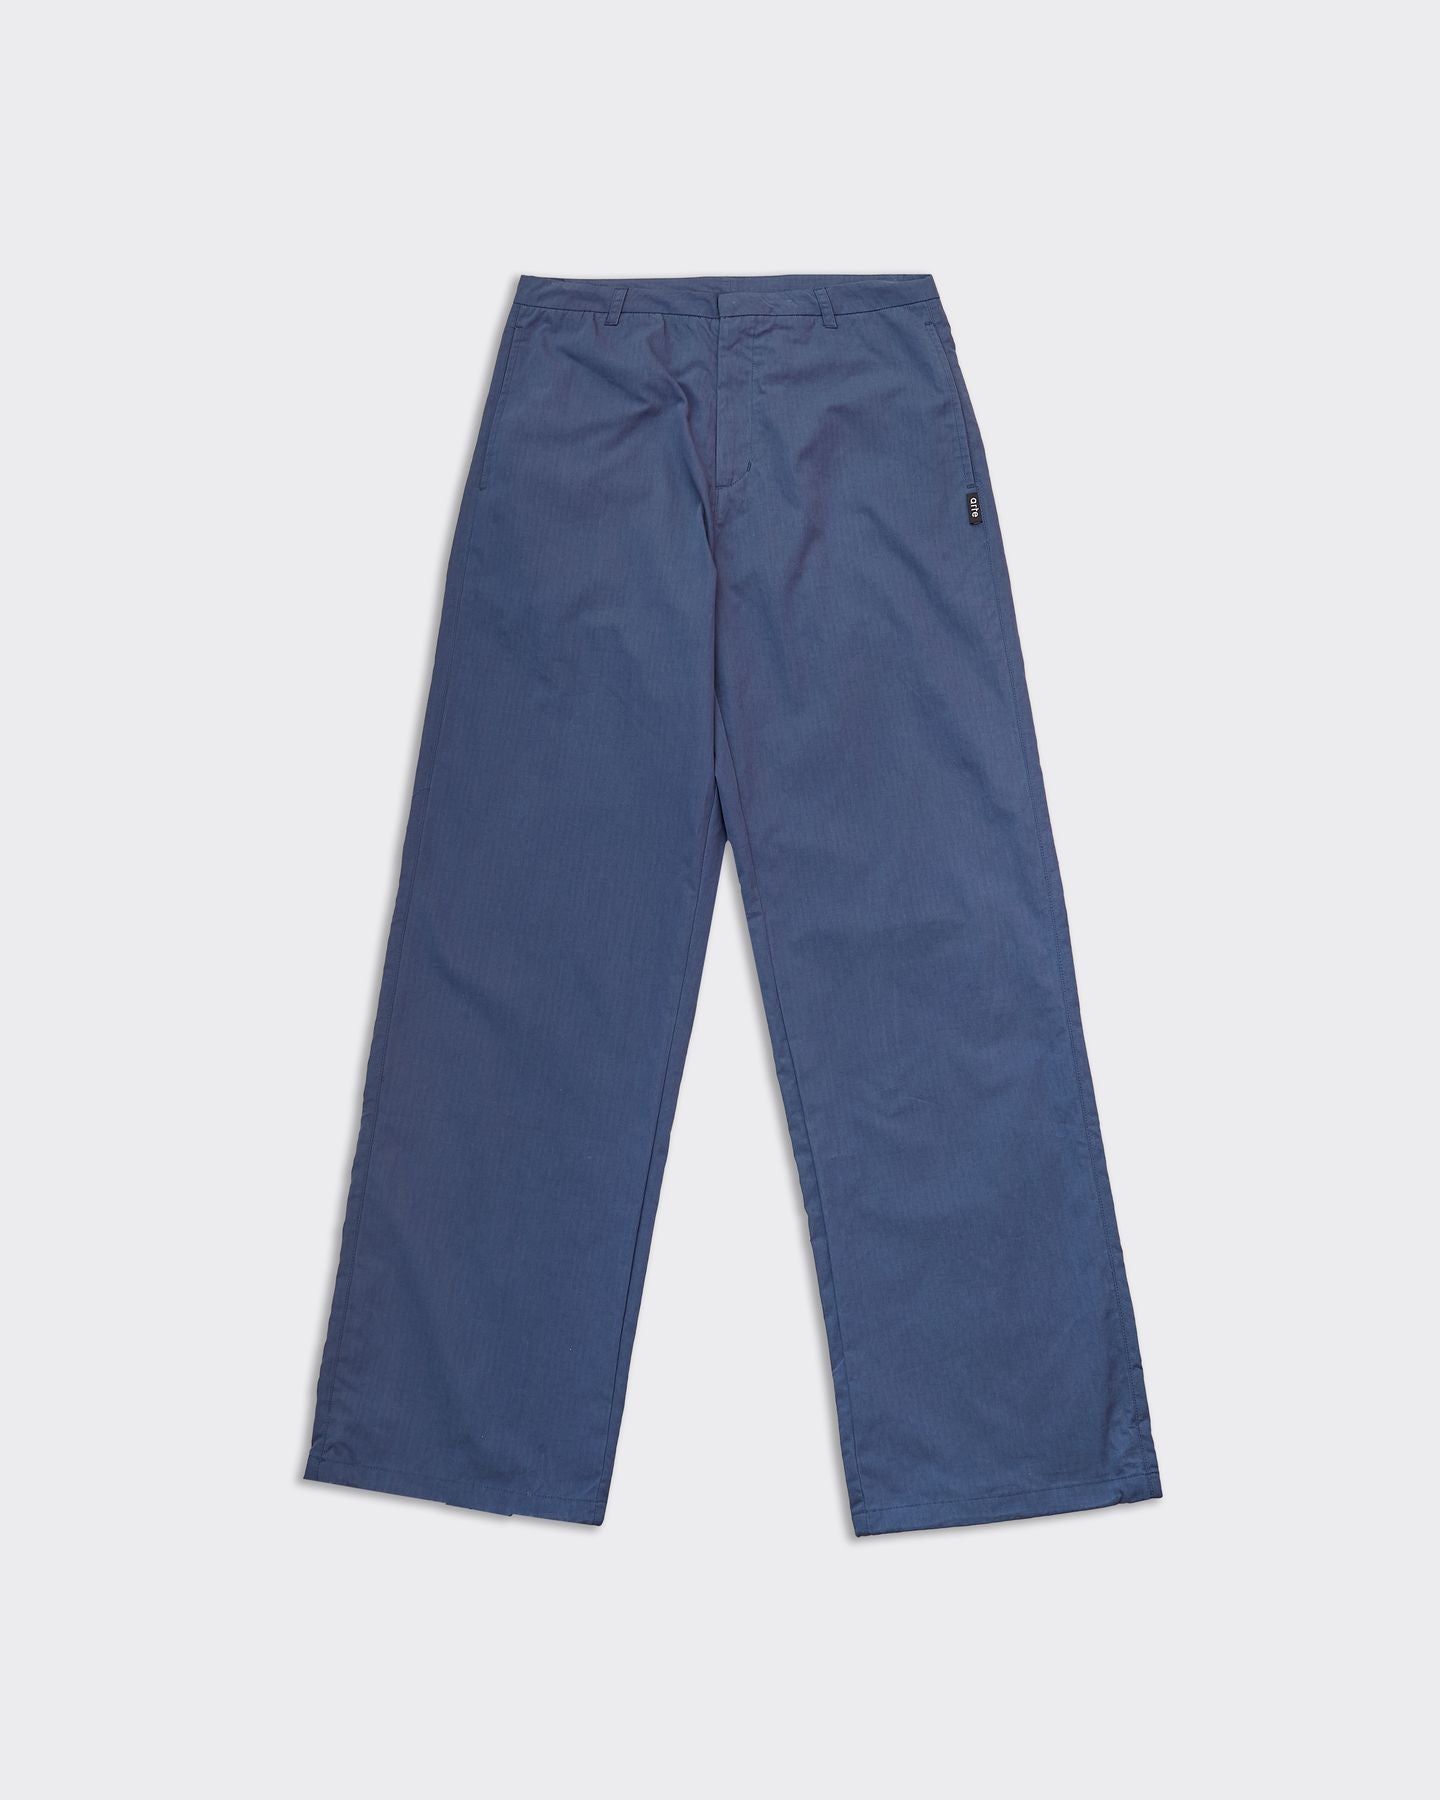 Peter Navy trousers